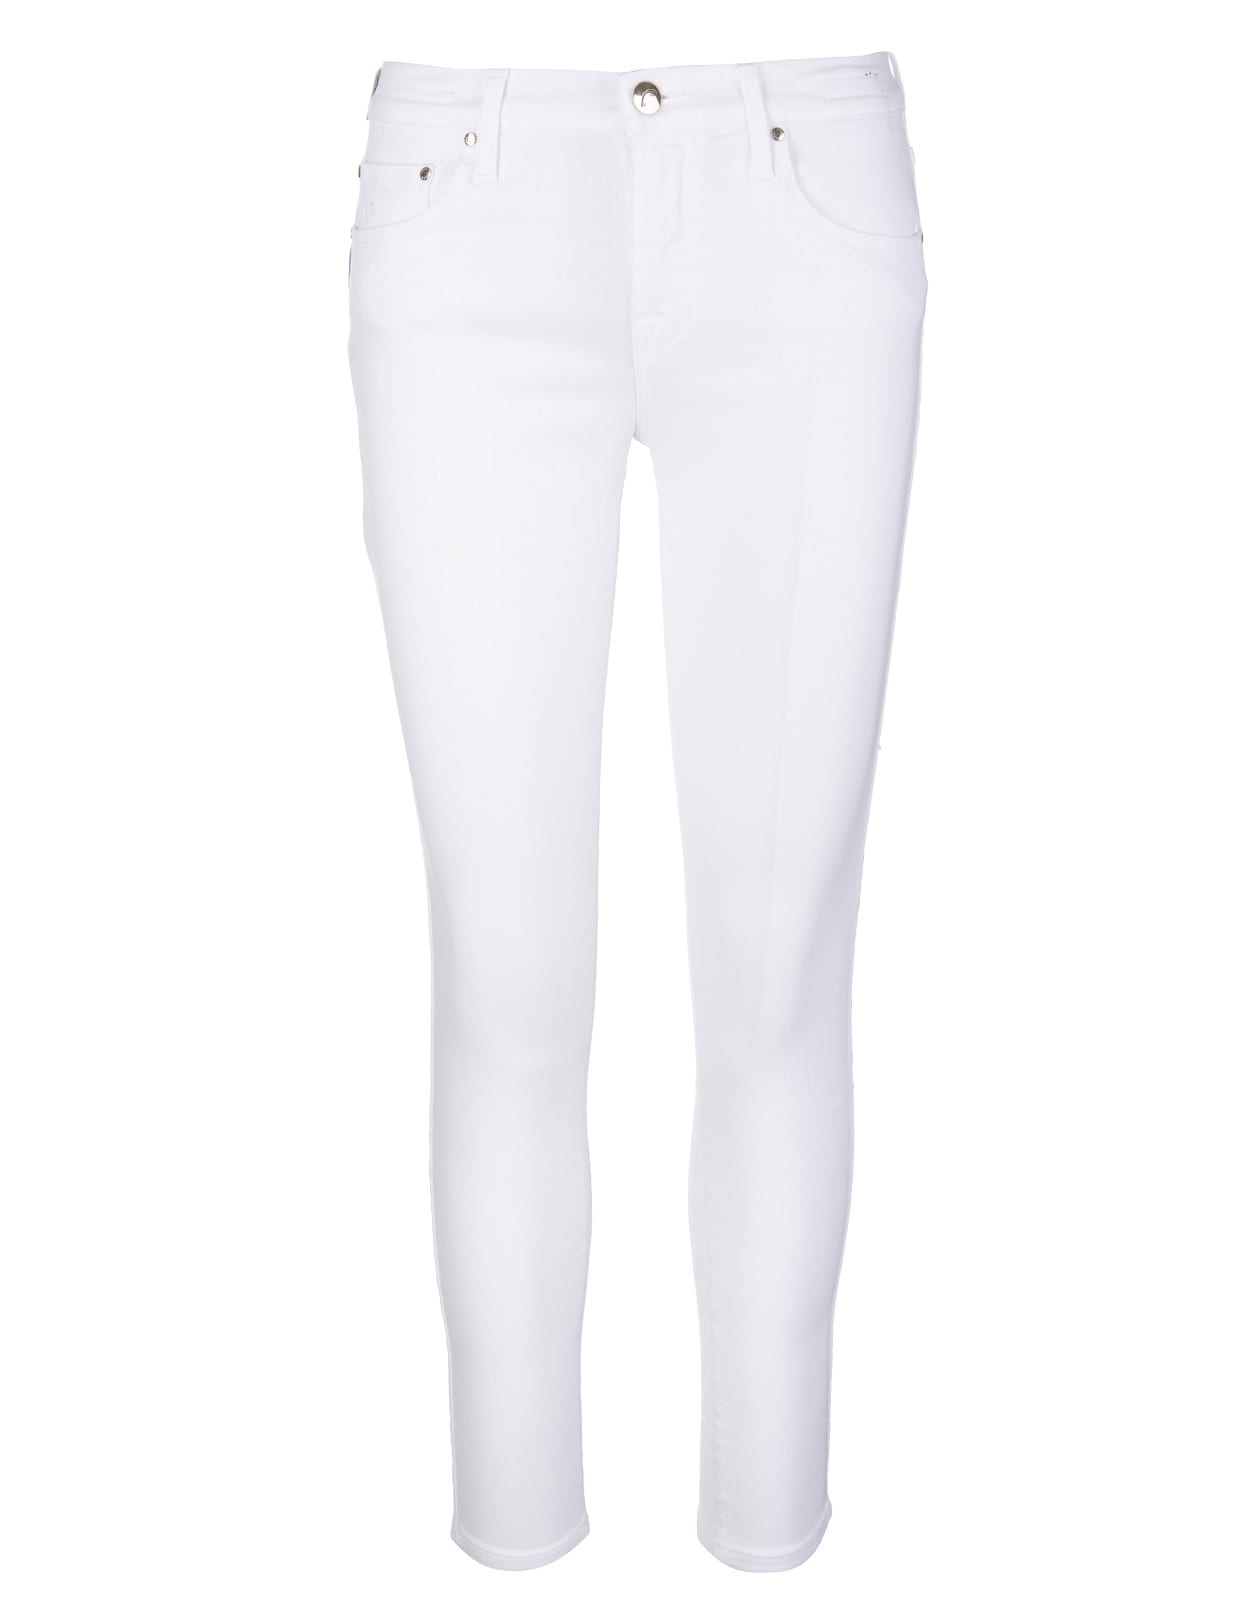 Jacob Cohen Woman White Kimberly Crop Skinny Jeans